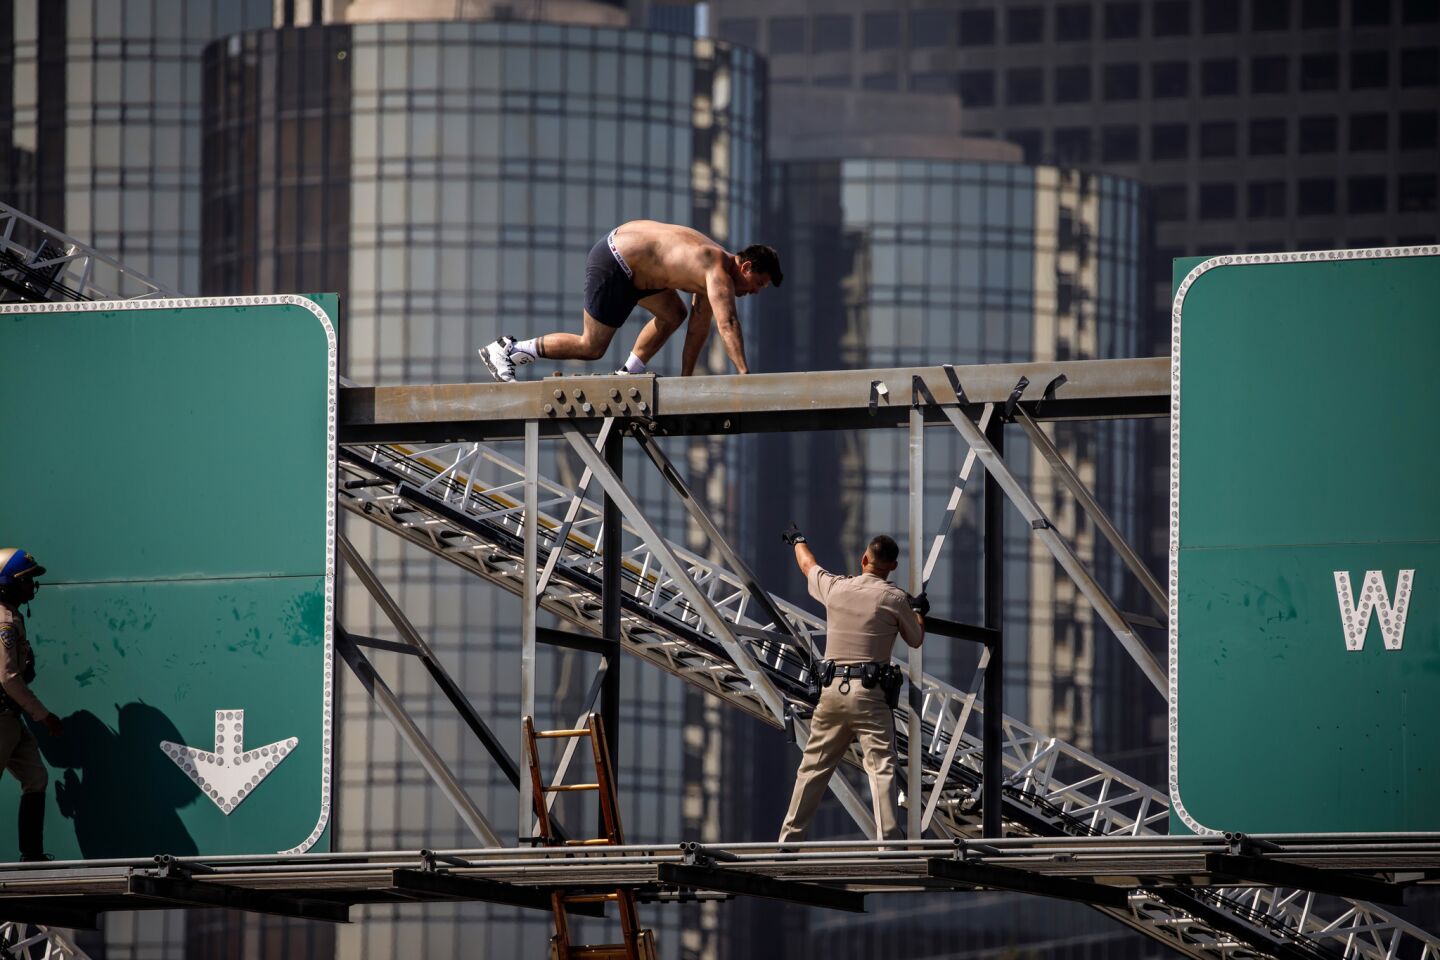 California Highway Patrol officers attempt to remove a shirtless man who scaled a freeway sign and shut down the southbound 110 Freeway in downtown Los Angeles.